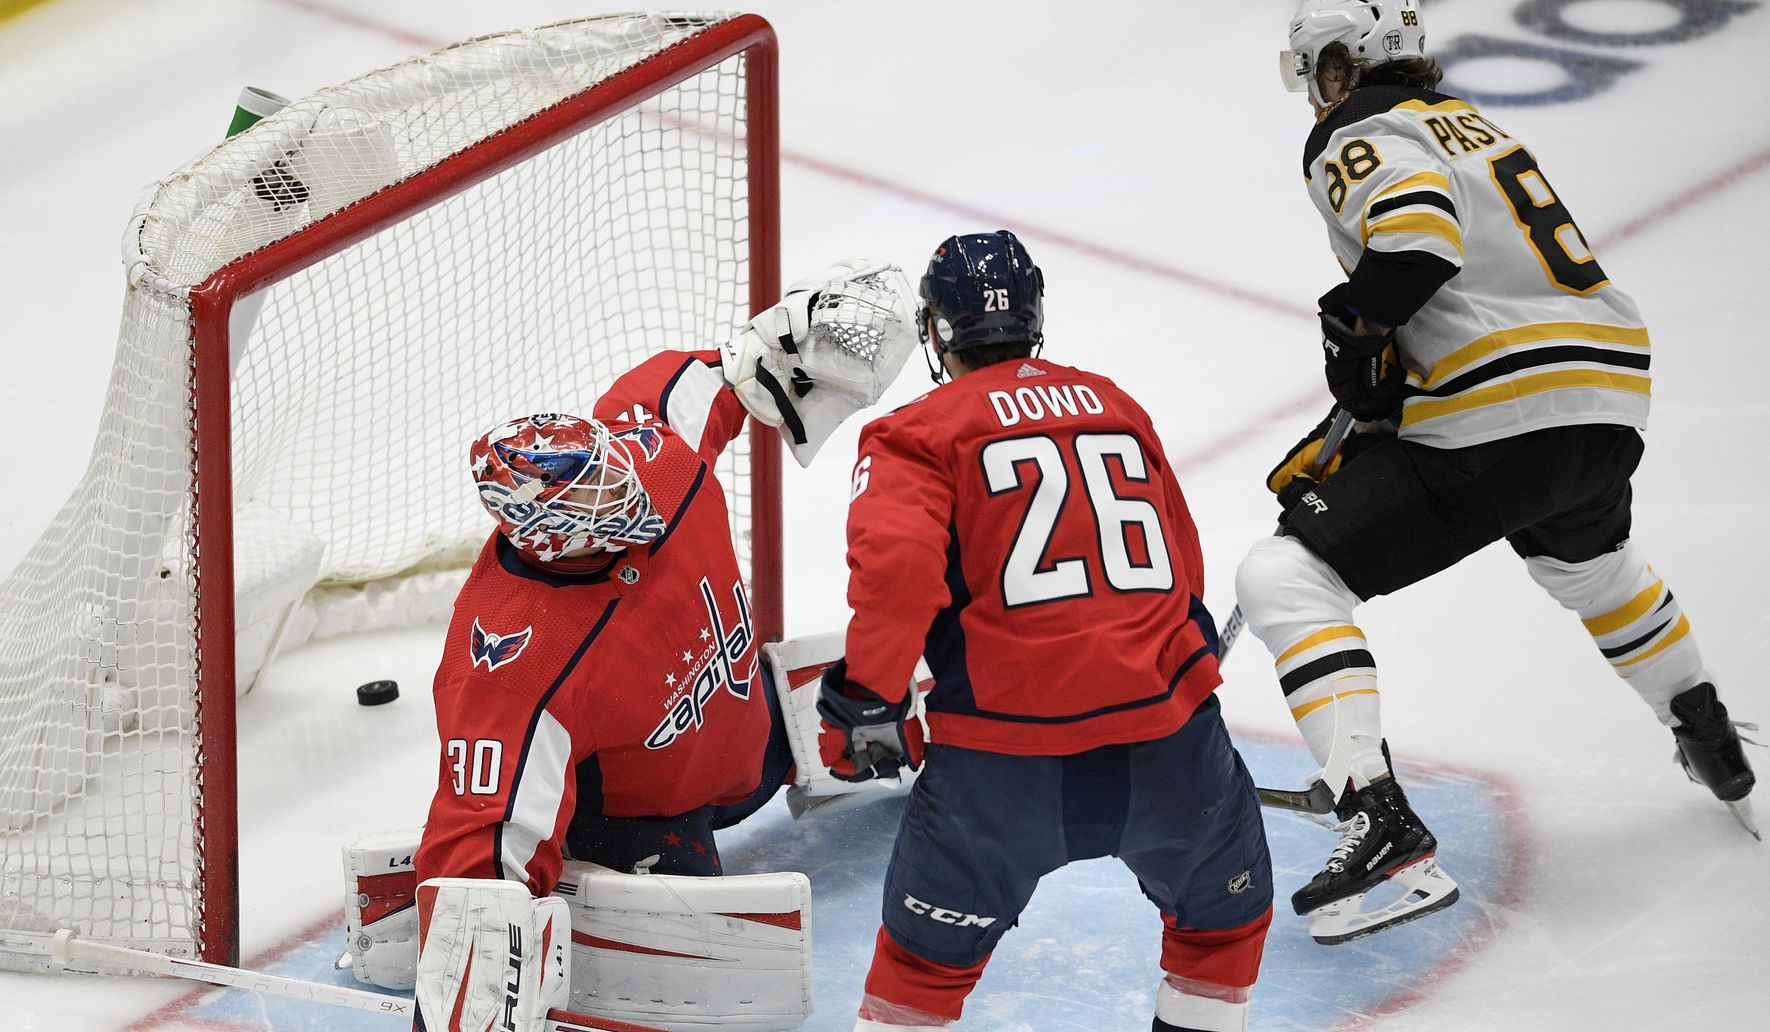 Capitals lose to Bruins, spelling third straight first-round playoffs exit